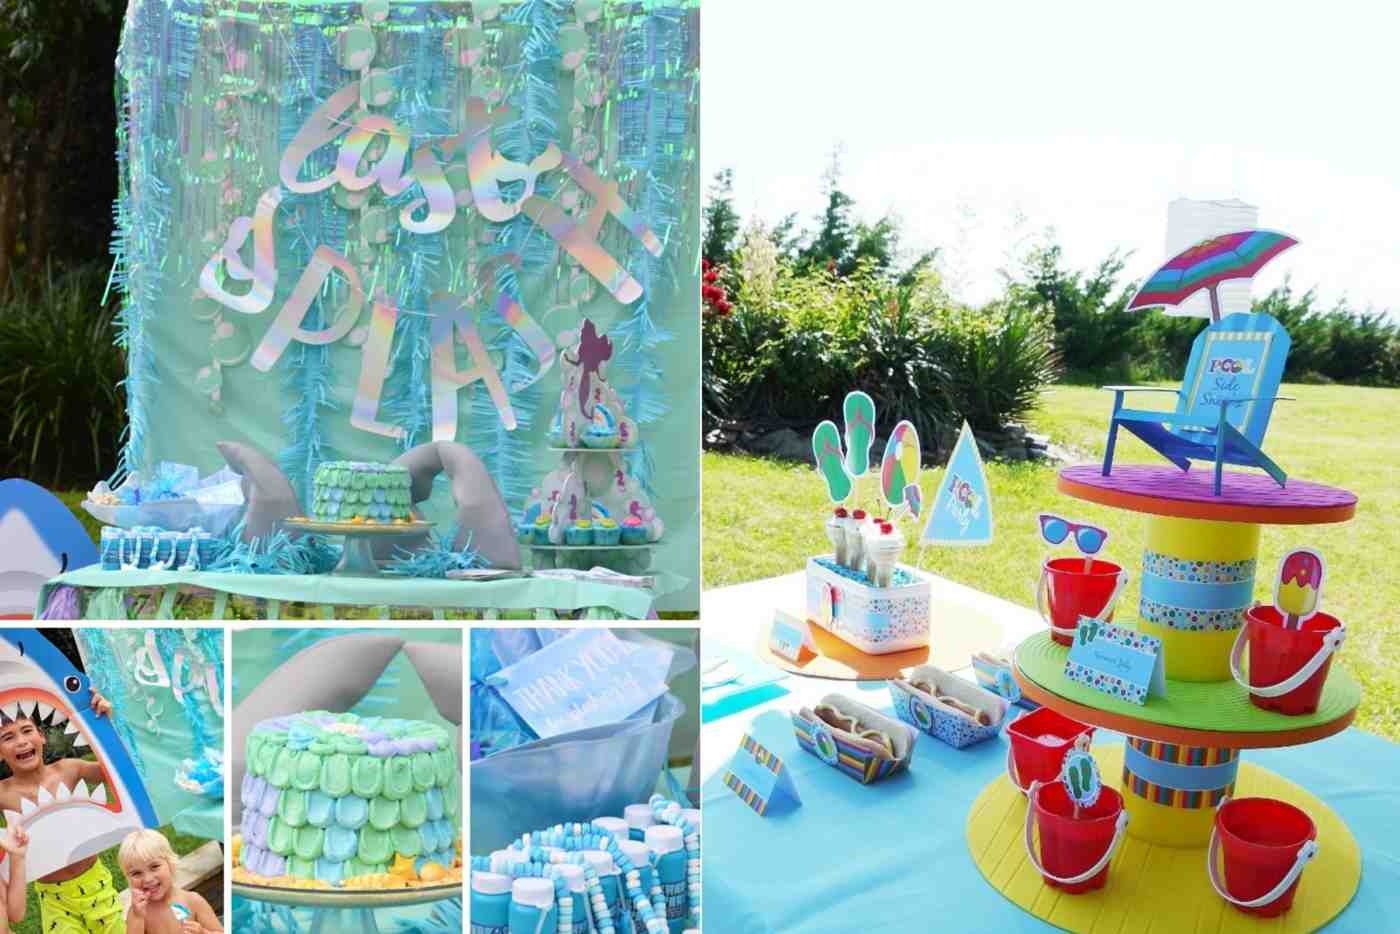 Pool party with children's theme with appropriate theme plans and design